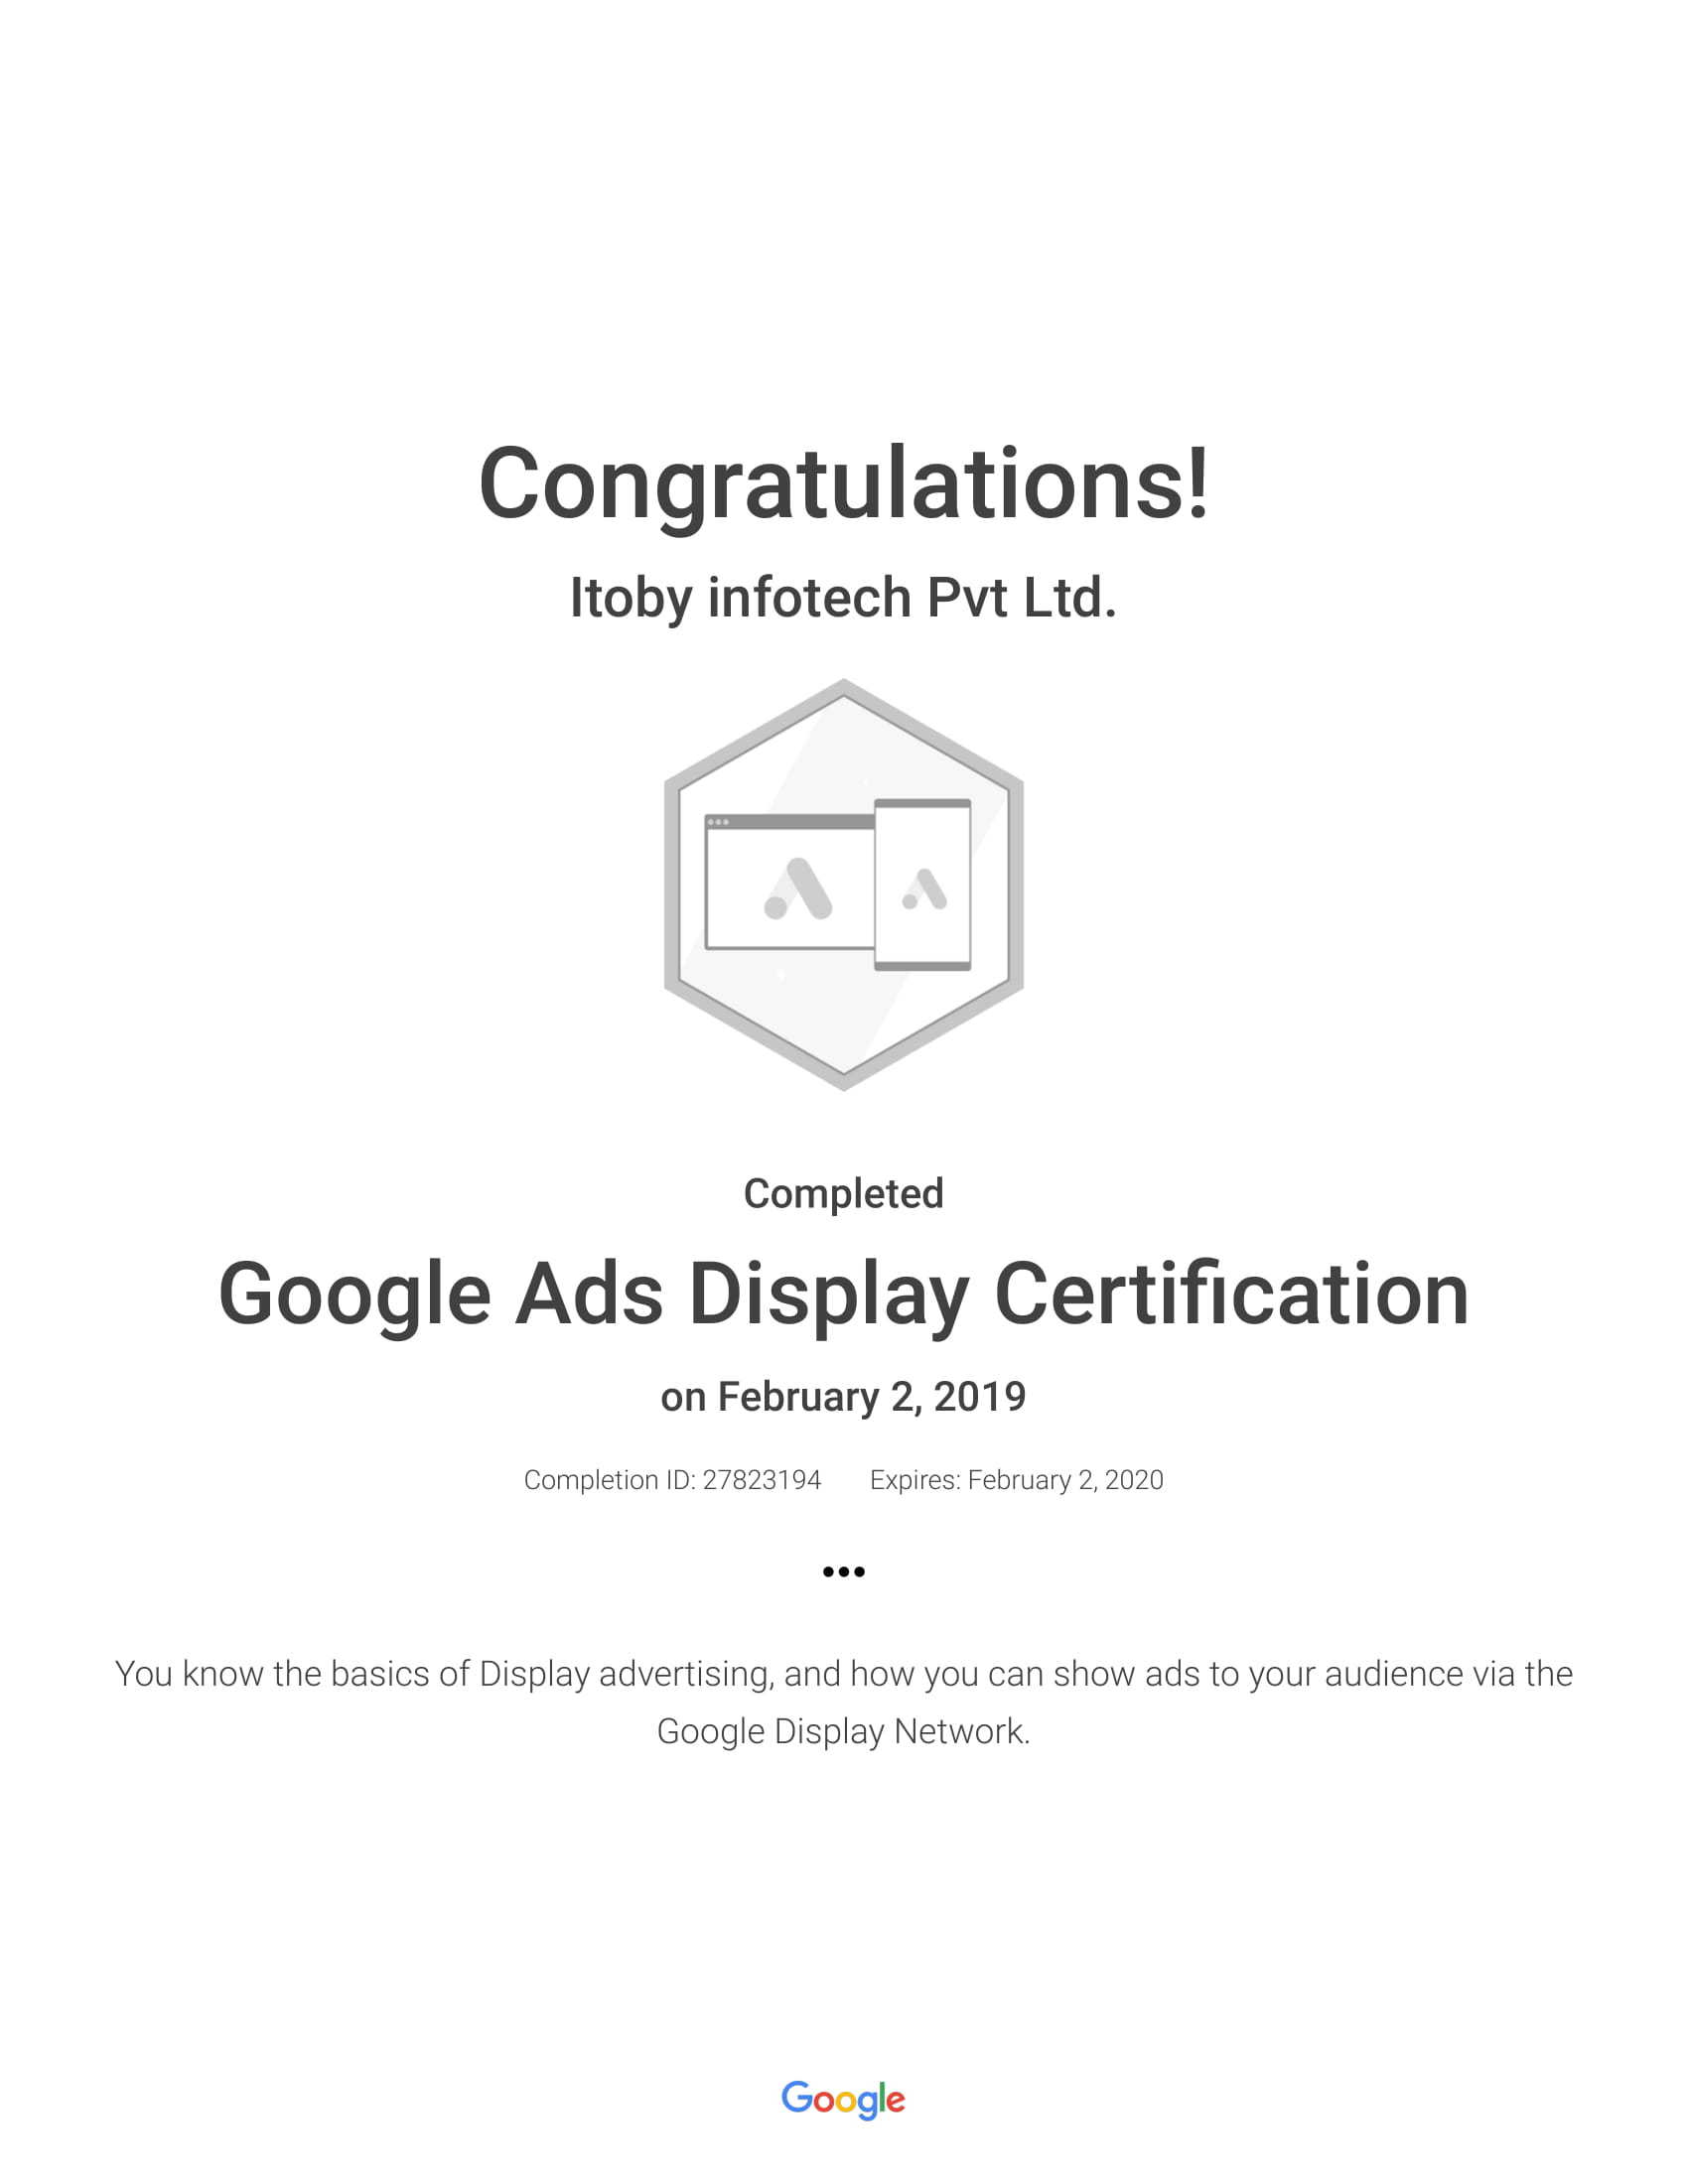 Google-Ads-Display-Certification-itoby-infotech